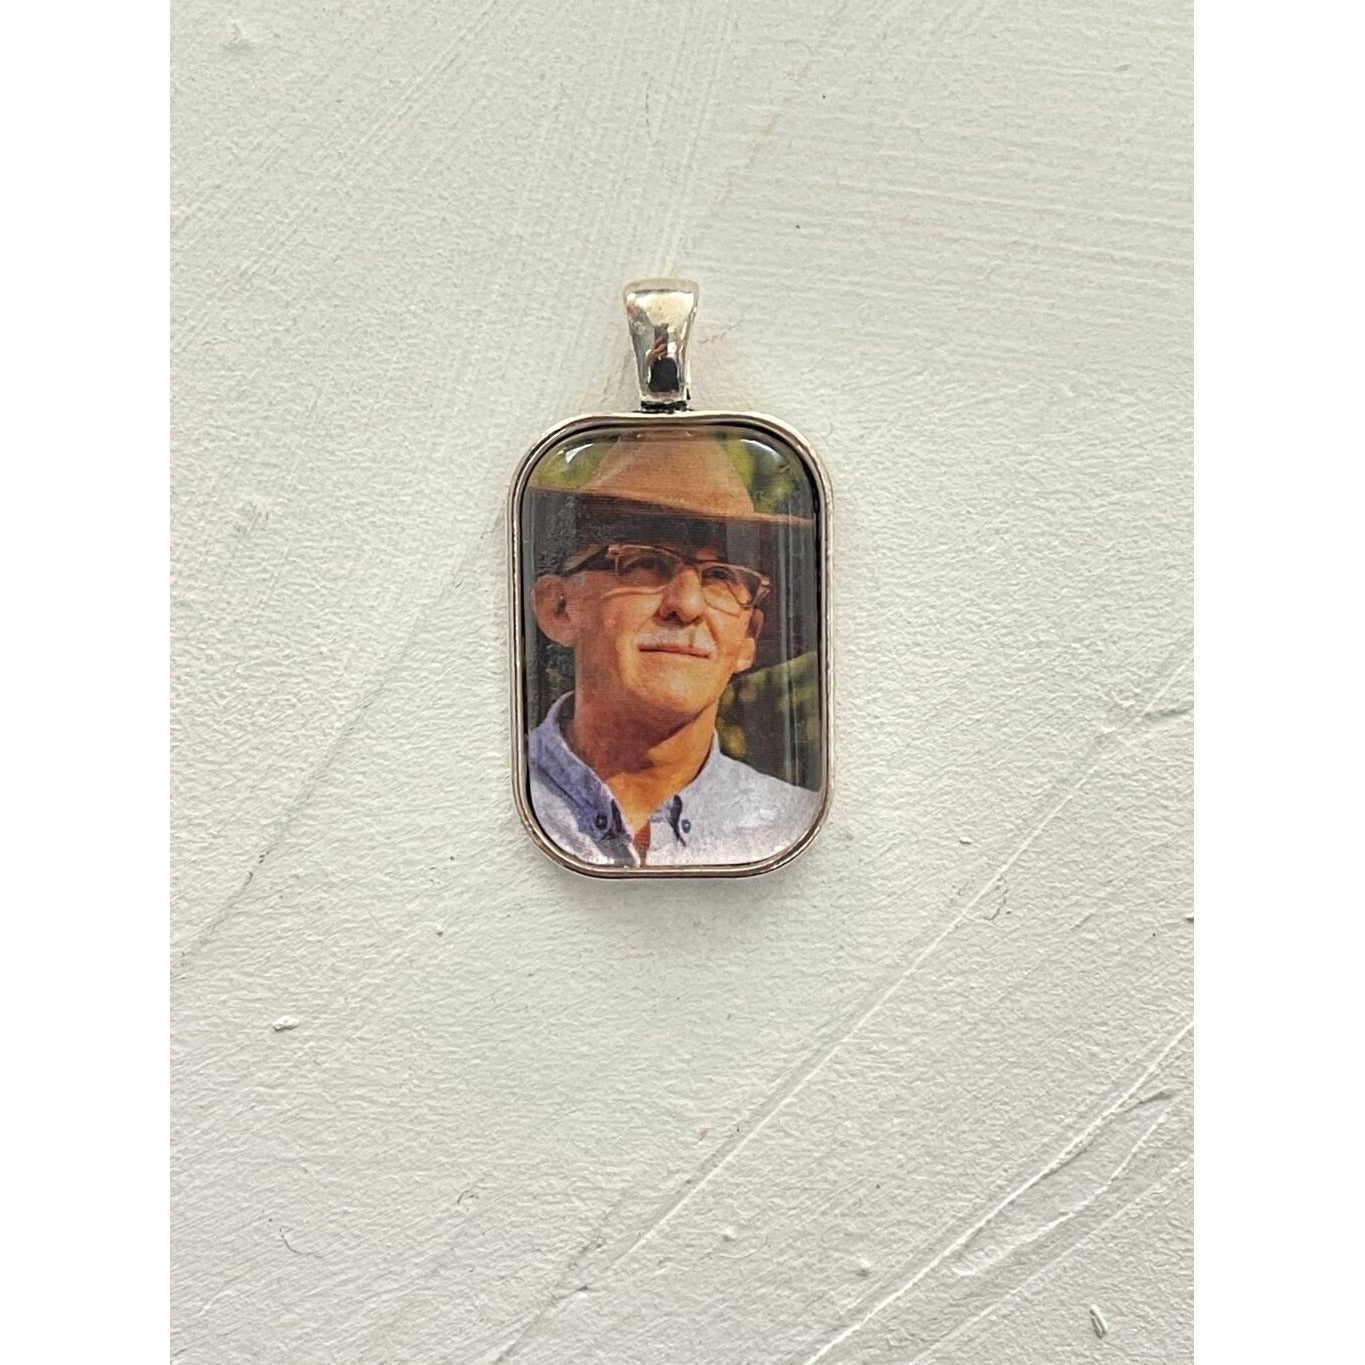 A memorial pendant or memorial charm in the design called Rectangle Memorial Photo Pendant, showing a photo of a grandfather inside. The pendant is shown on a white neutral textured background and is intended to be tied to a wedding bouquet with ribbon or hung from a chain to wear, to include a deceased relative on your wedding day.